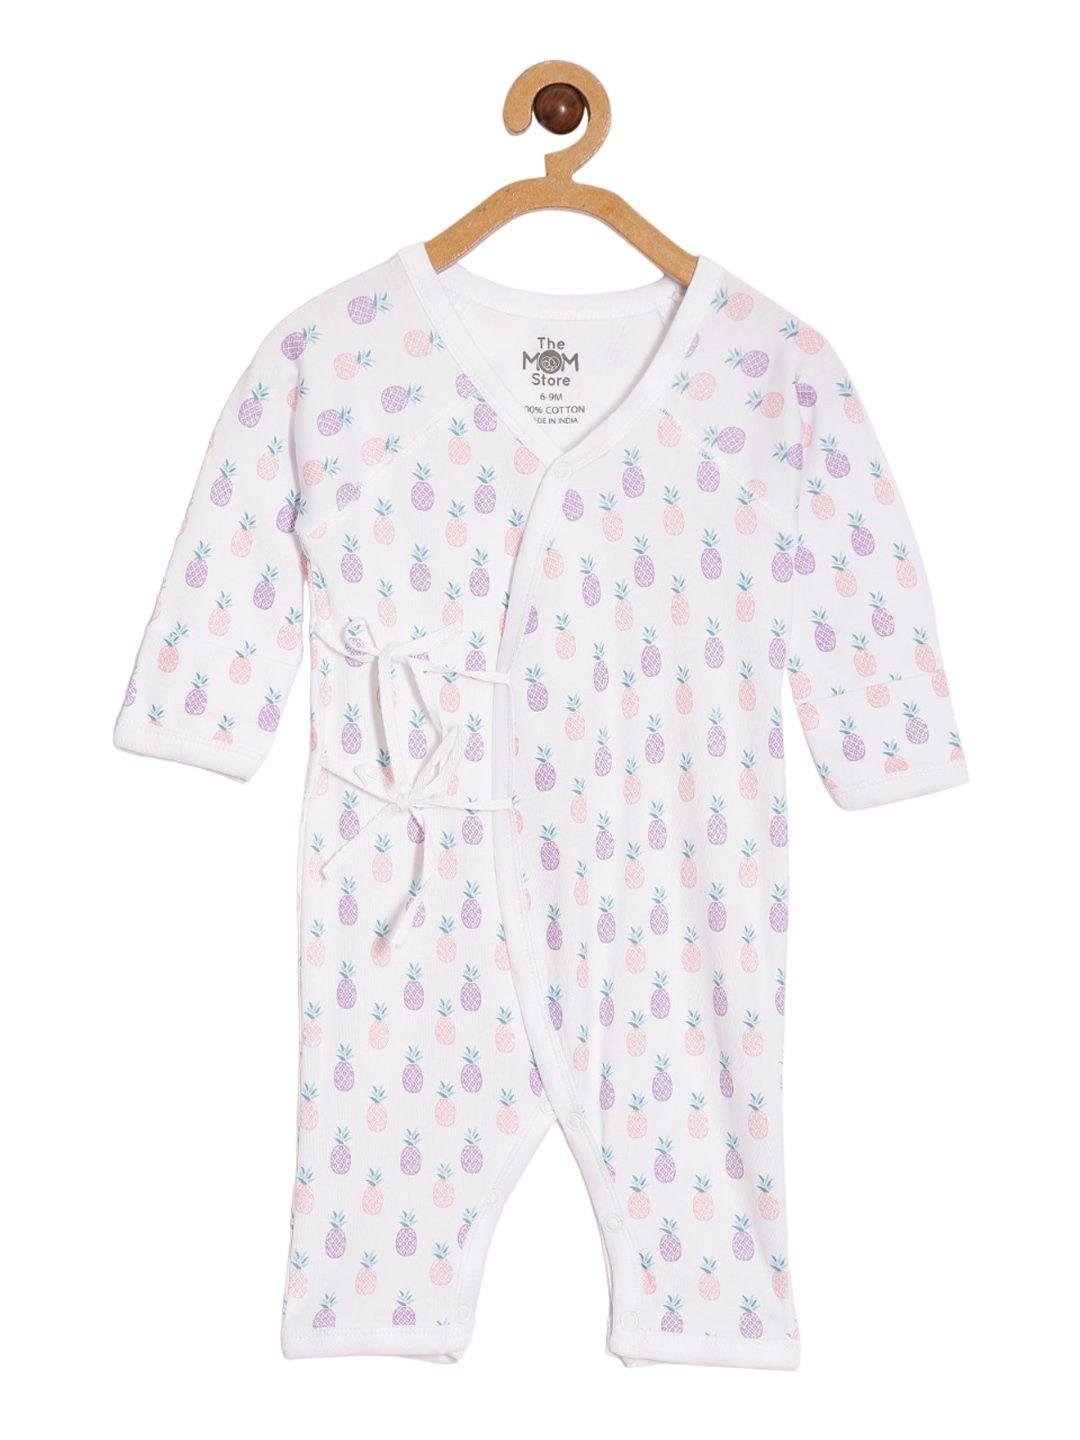 the mom store infants i pine printed cotton romper